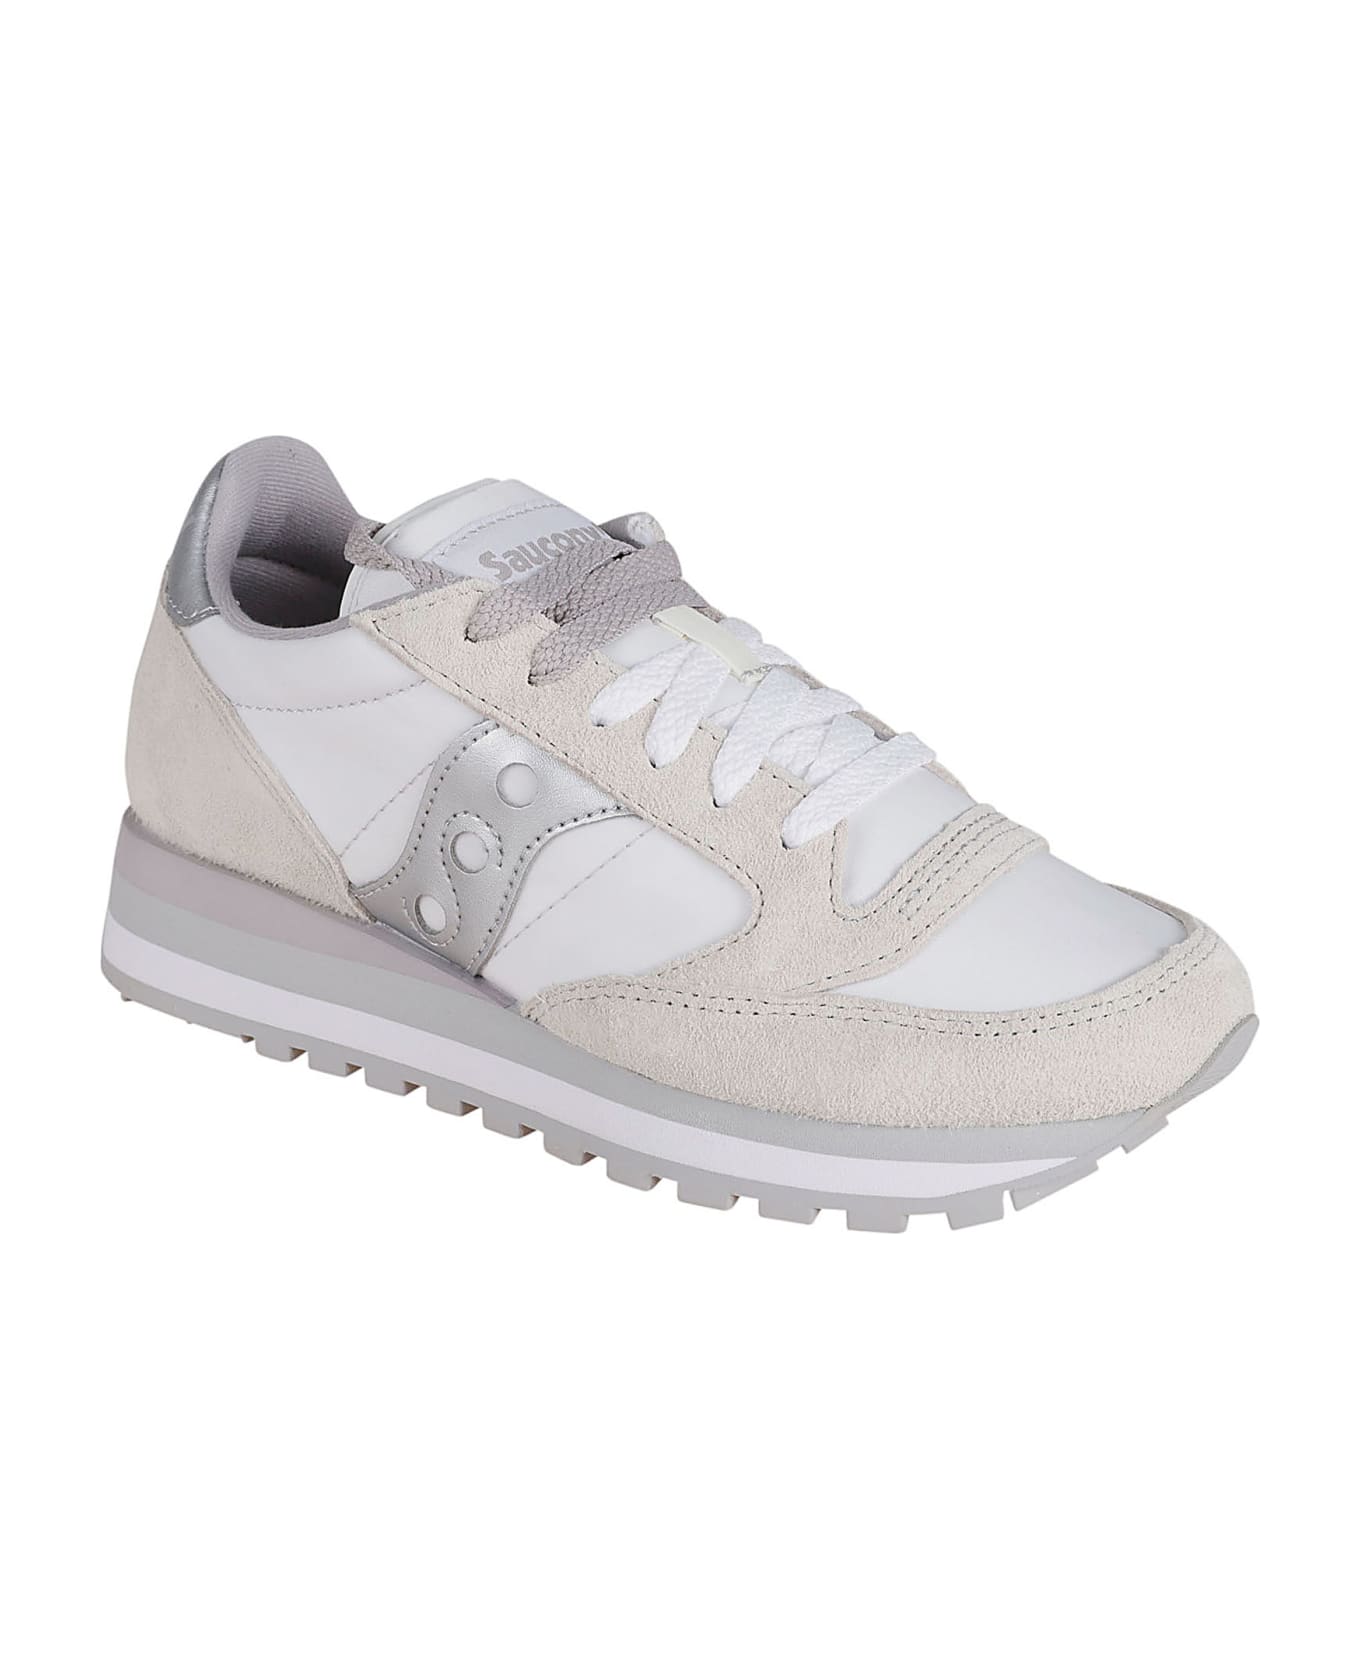 Saucony Triple Sneakers - White/Silver